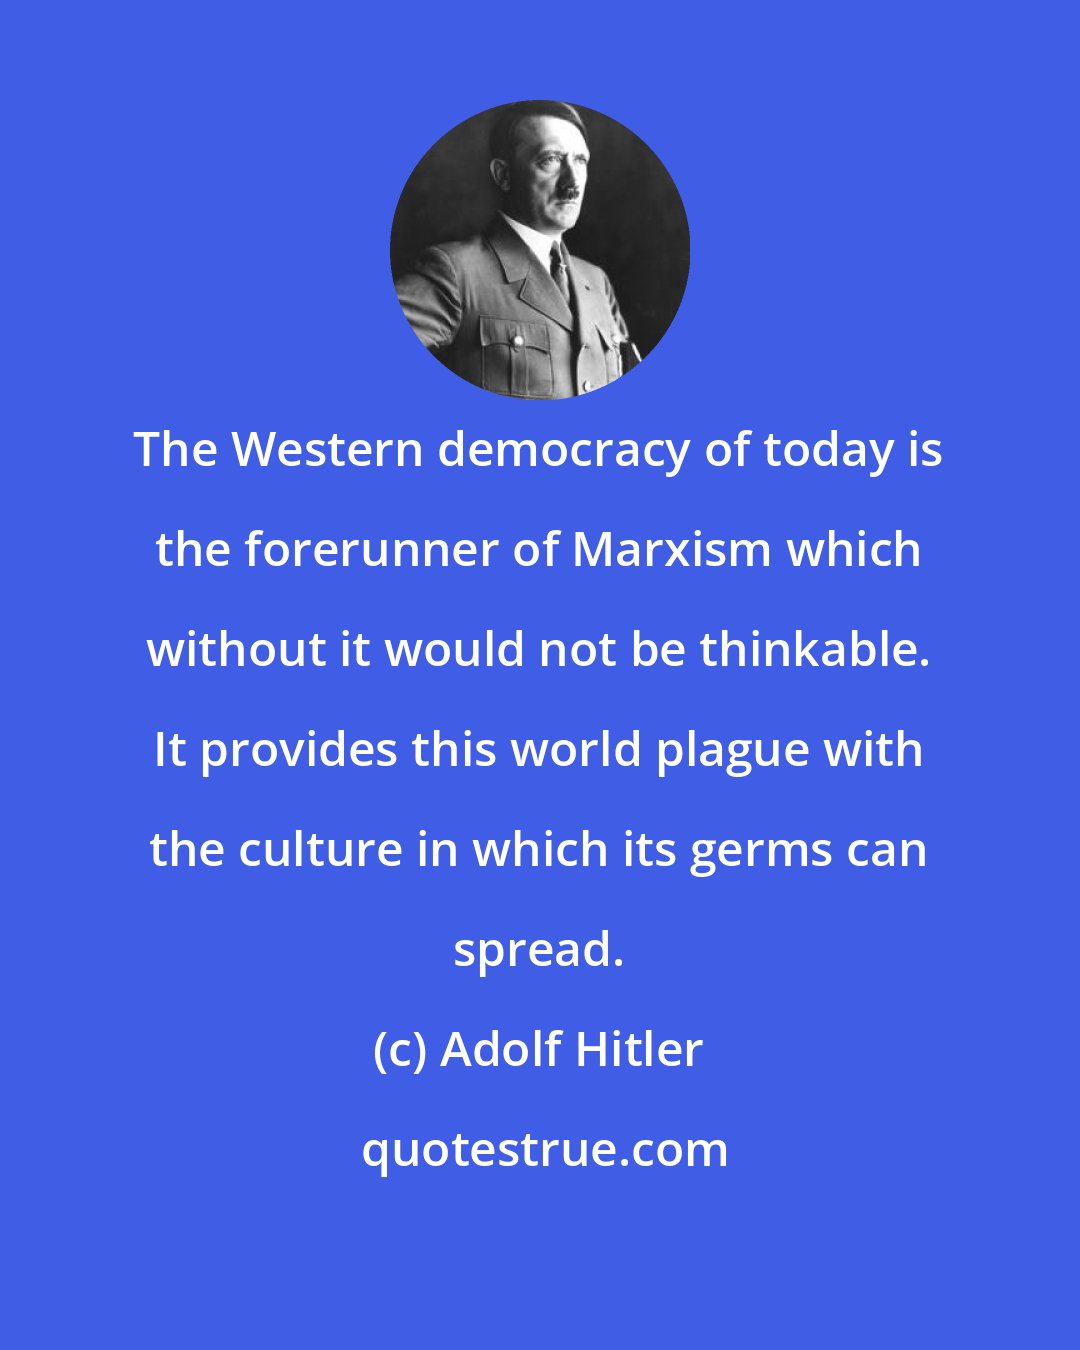 Adolf Hitler: The Western democracy of today is the forerunner of Marxism which without it would not be thinkable. It provides this world plague with the culture in which its germs can spread.